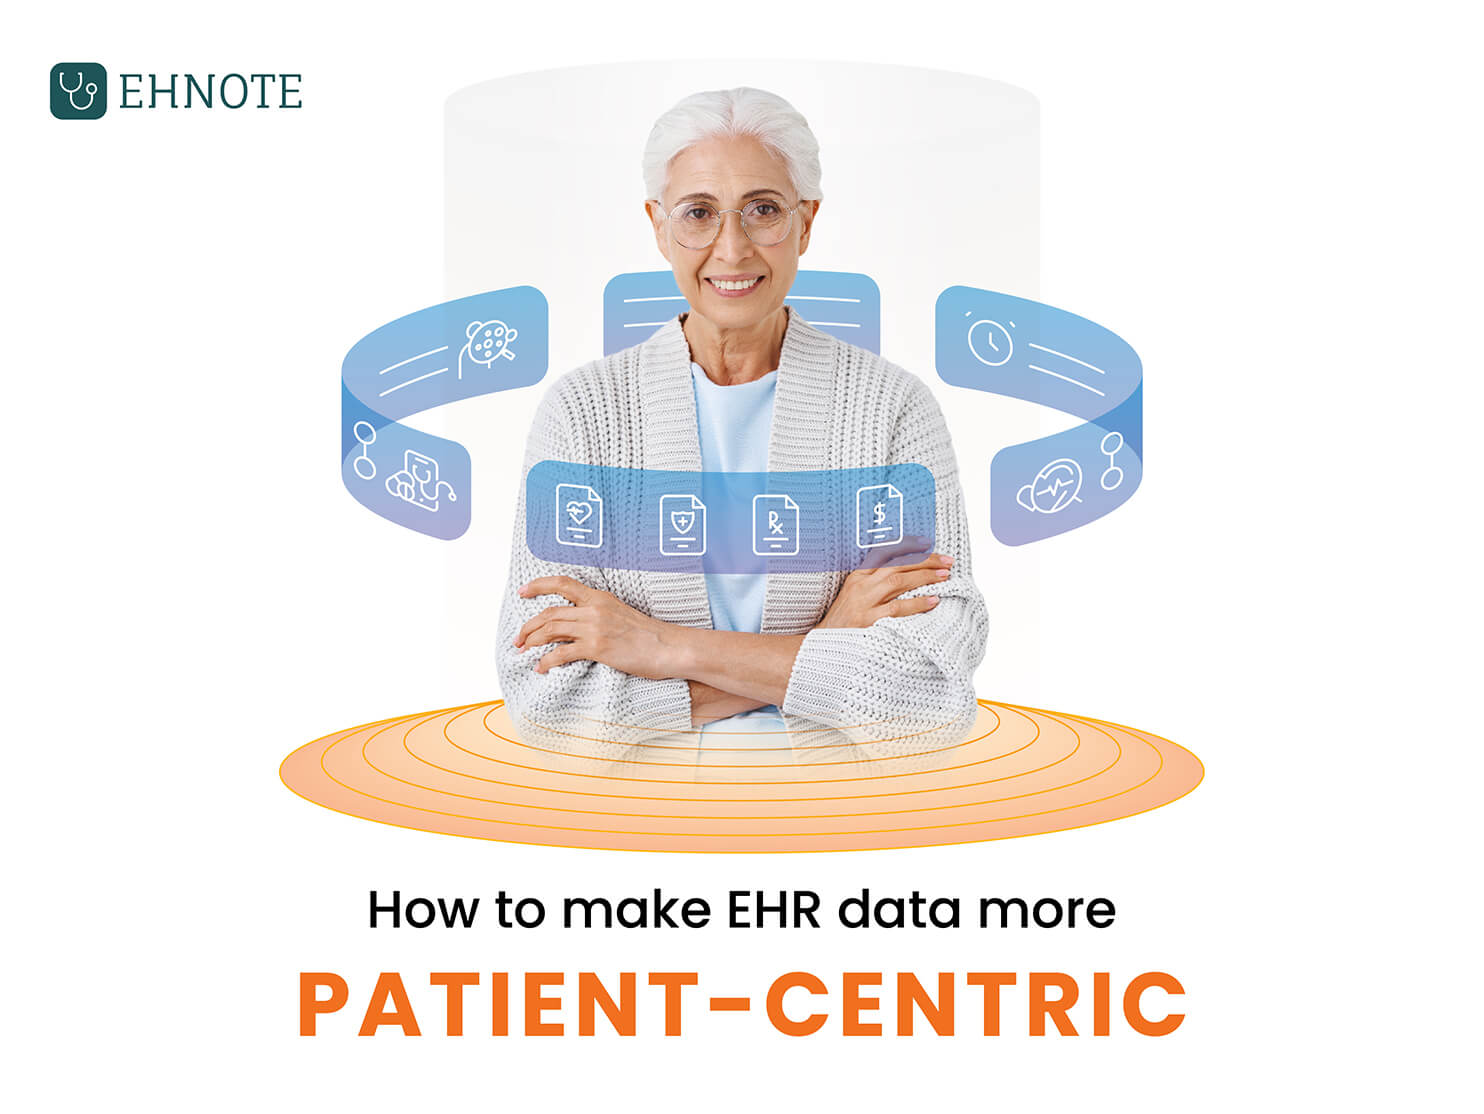 Patient centric ophthalmology EHR data